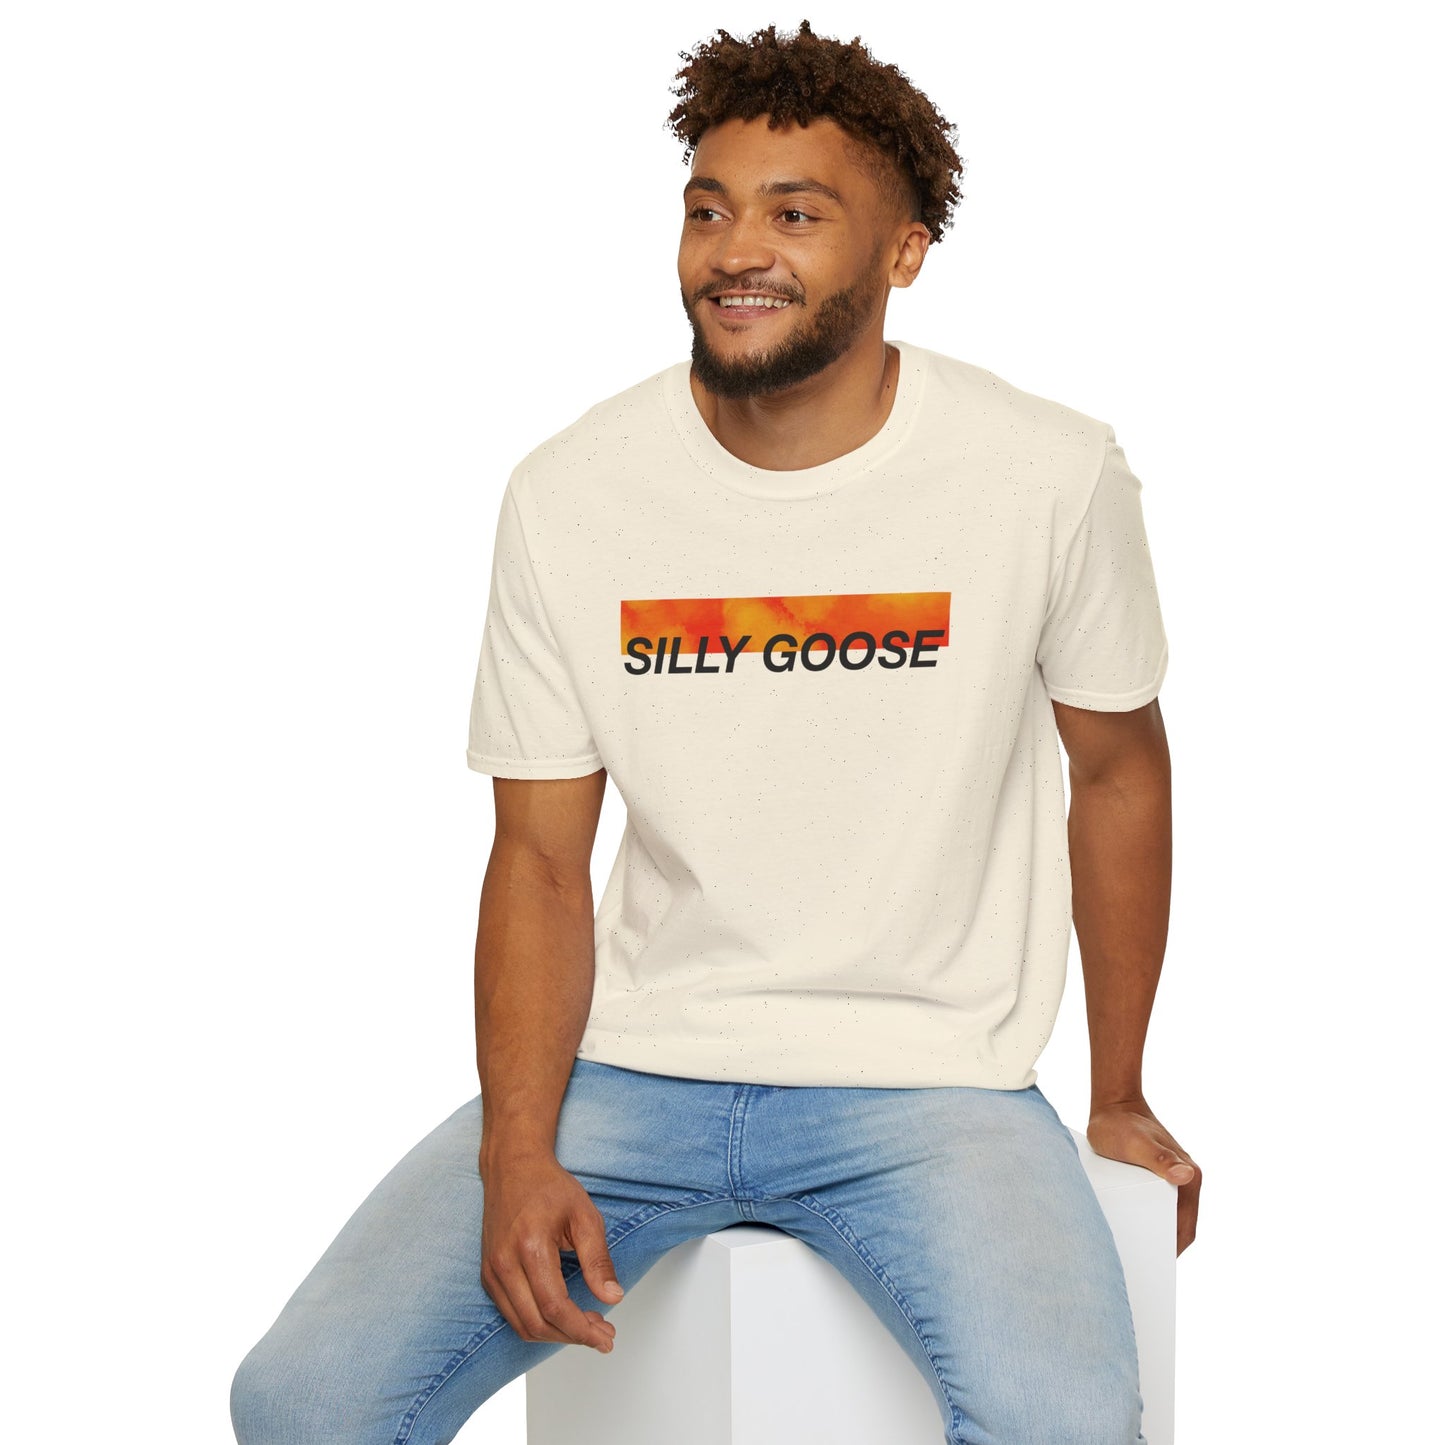 Silly Goose Shirt